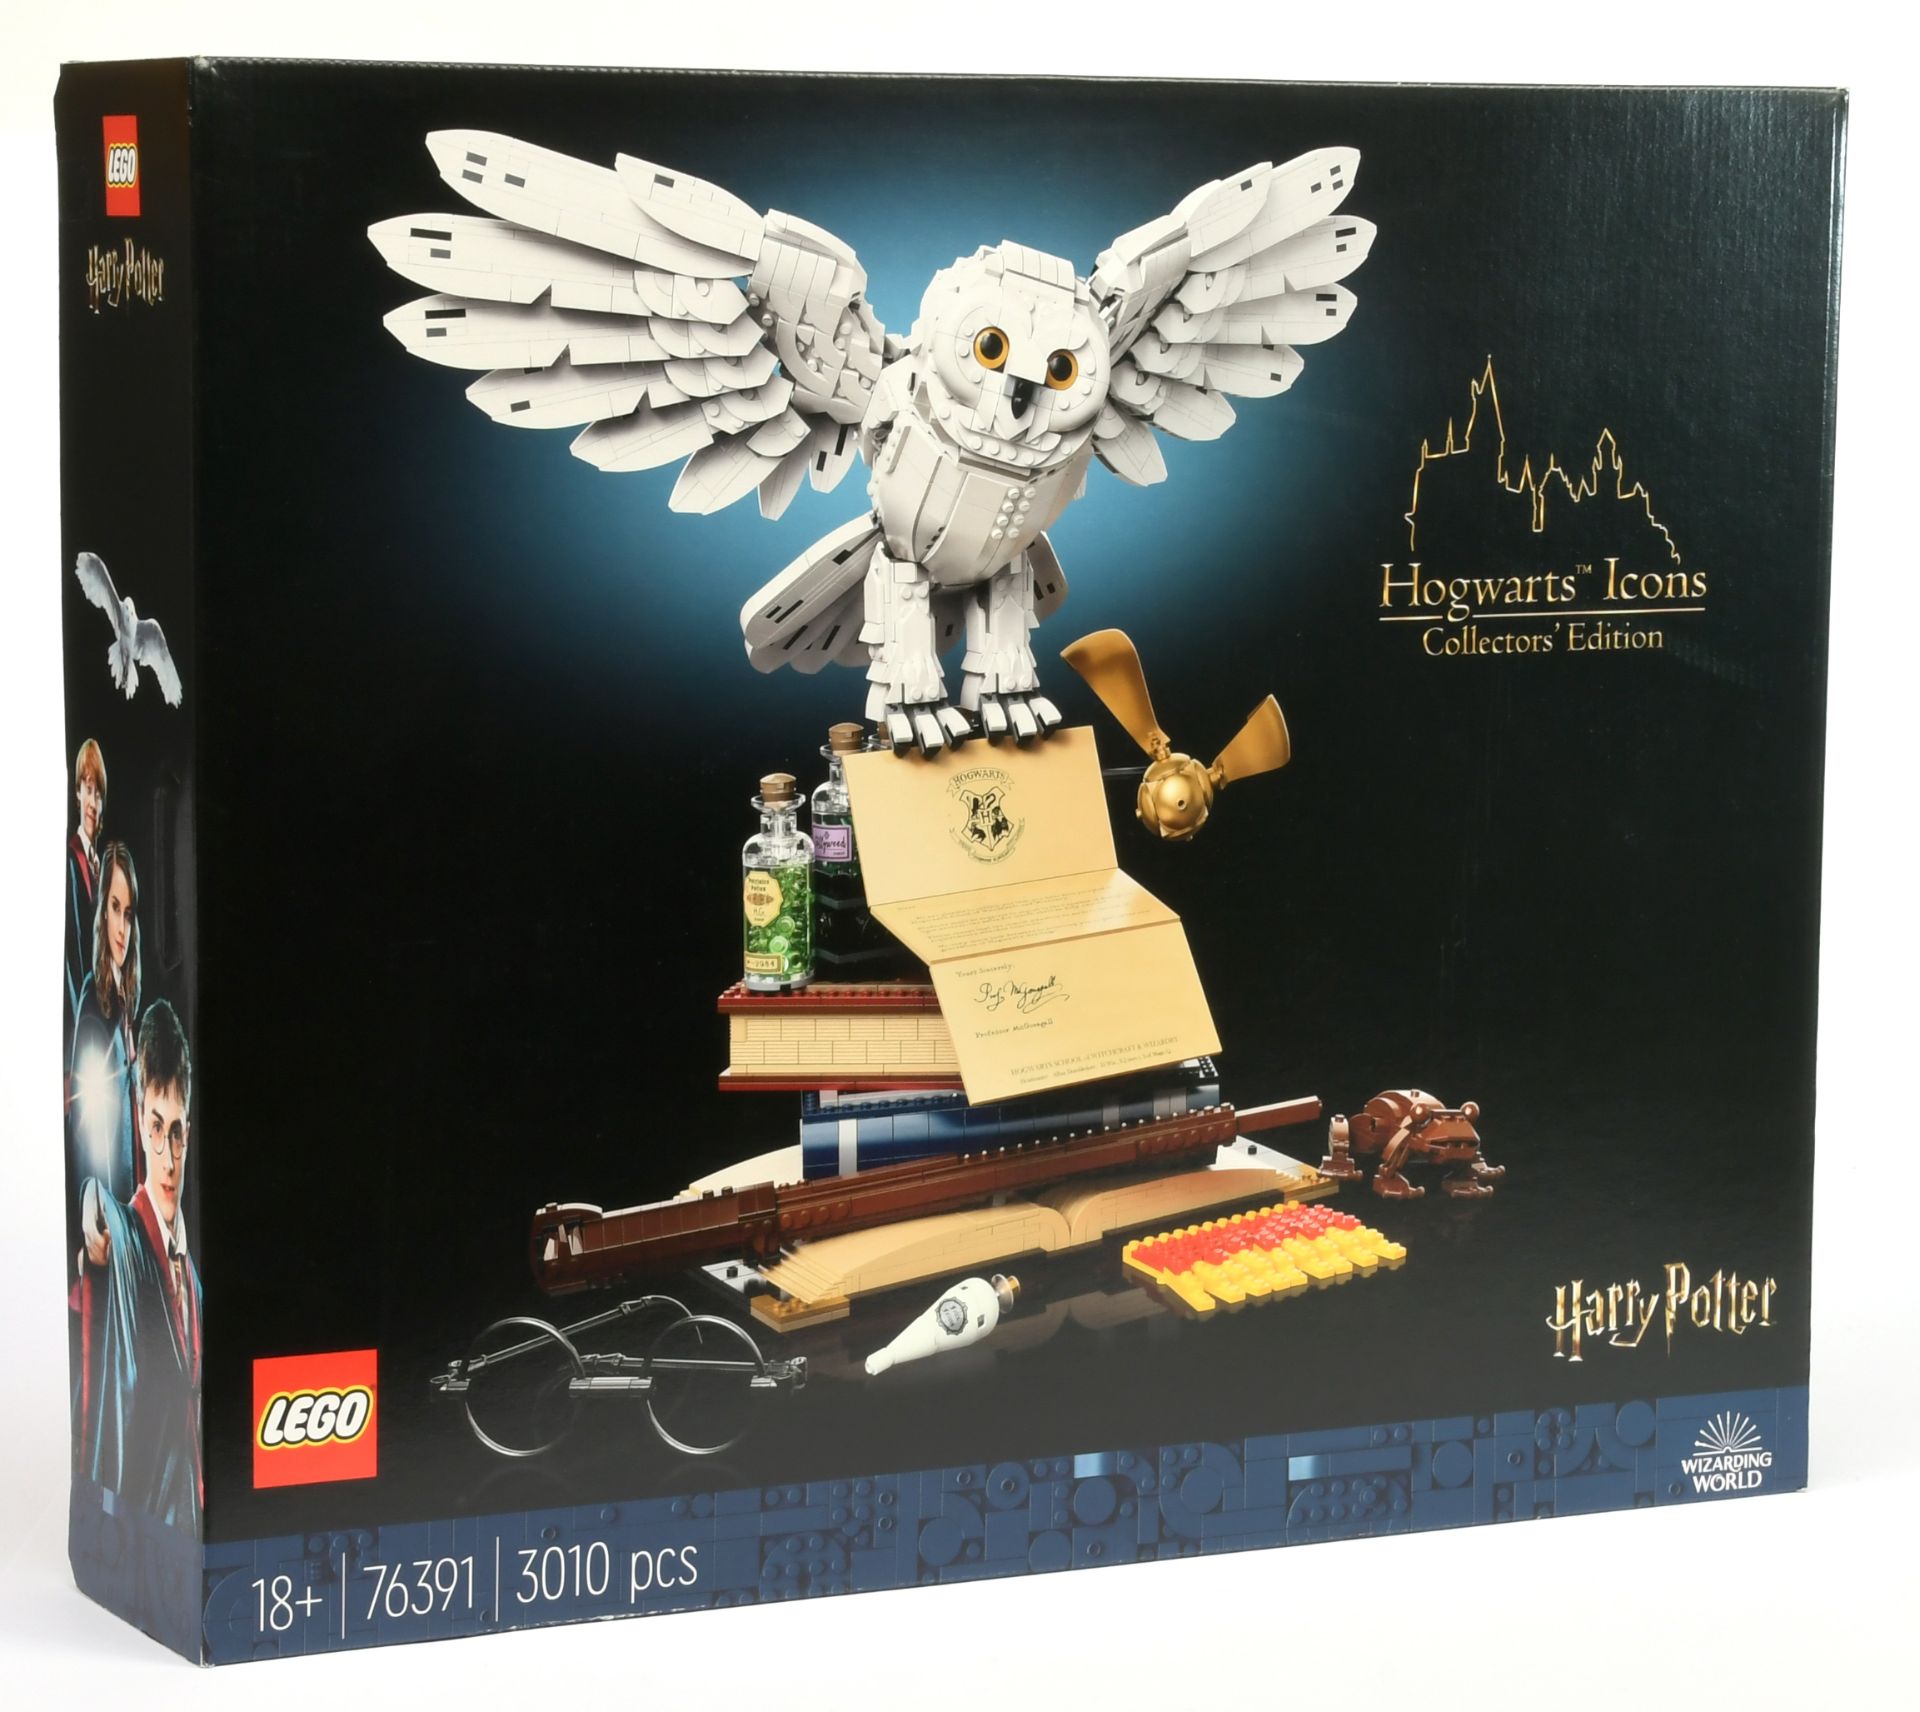 Lego Hogwarts Icons - Collectors' Edition #76391